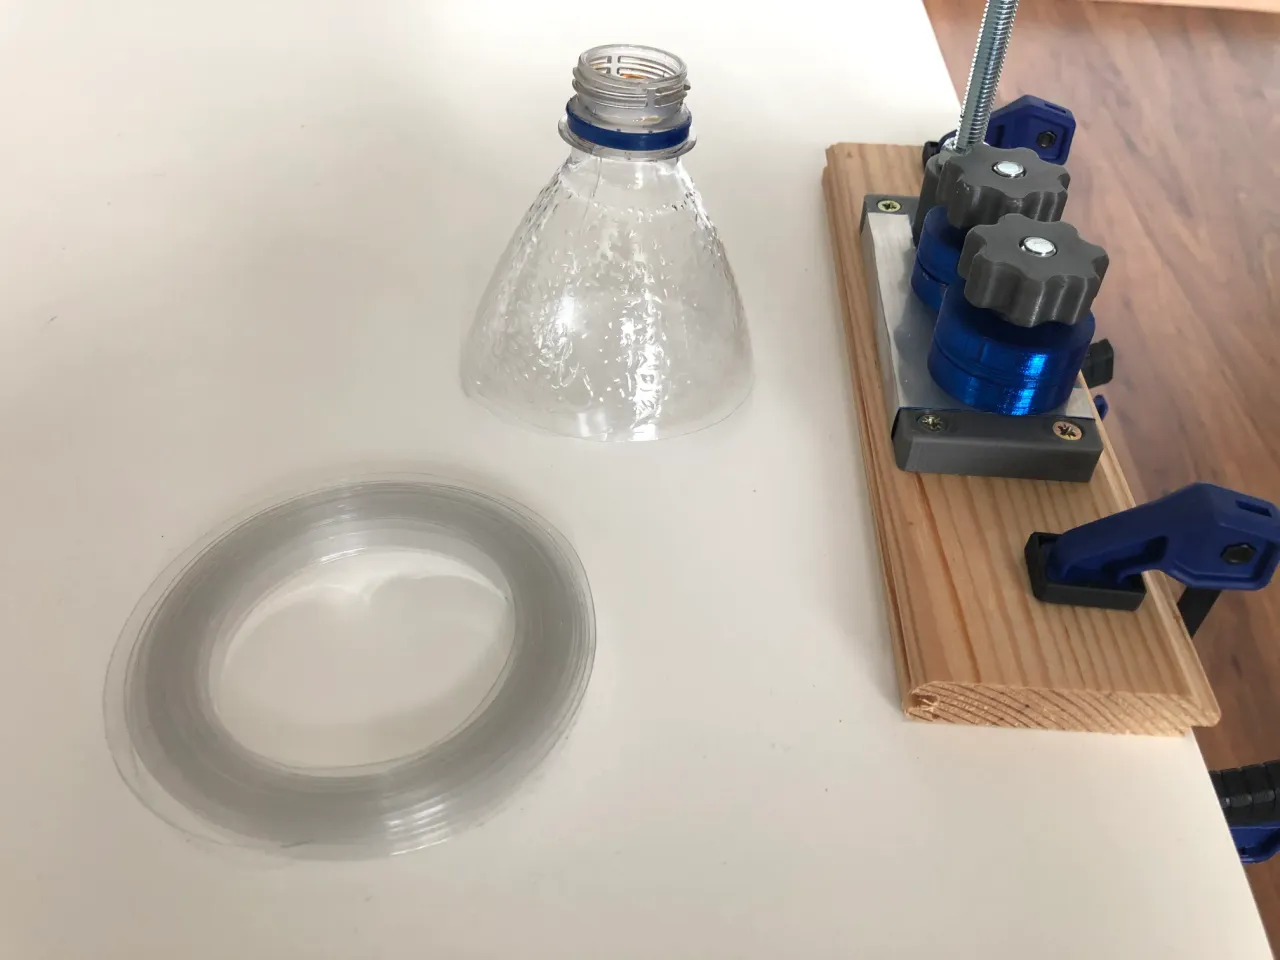 Making free filament from soda bottles part 1- A simple but accurate PET  bottle strip cutter.